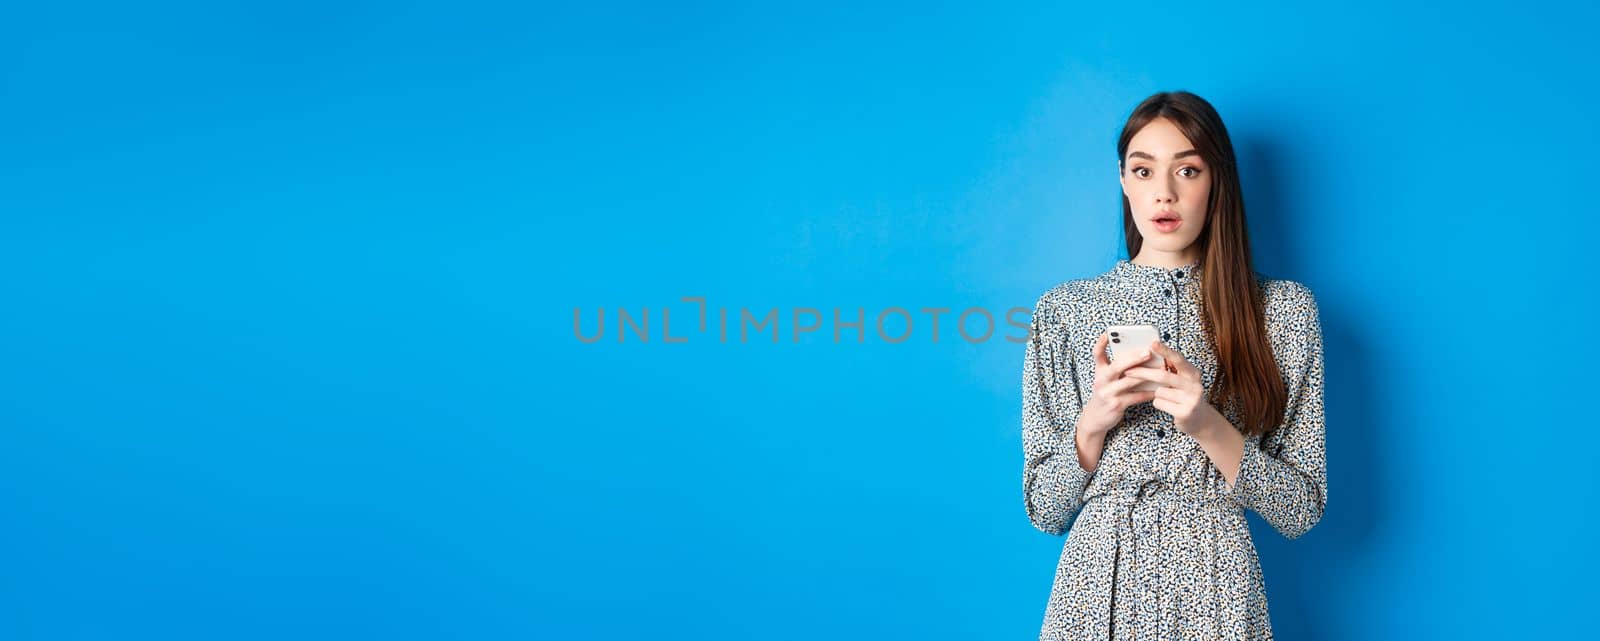 Woman look surprised after using mobile phone, standing on blue background.